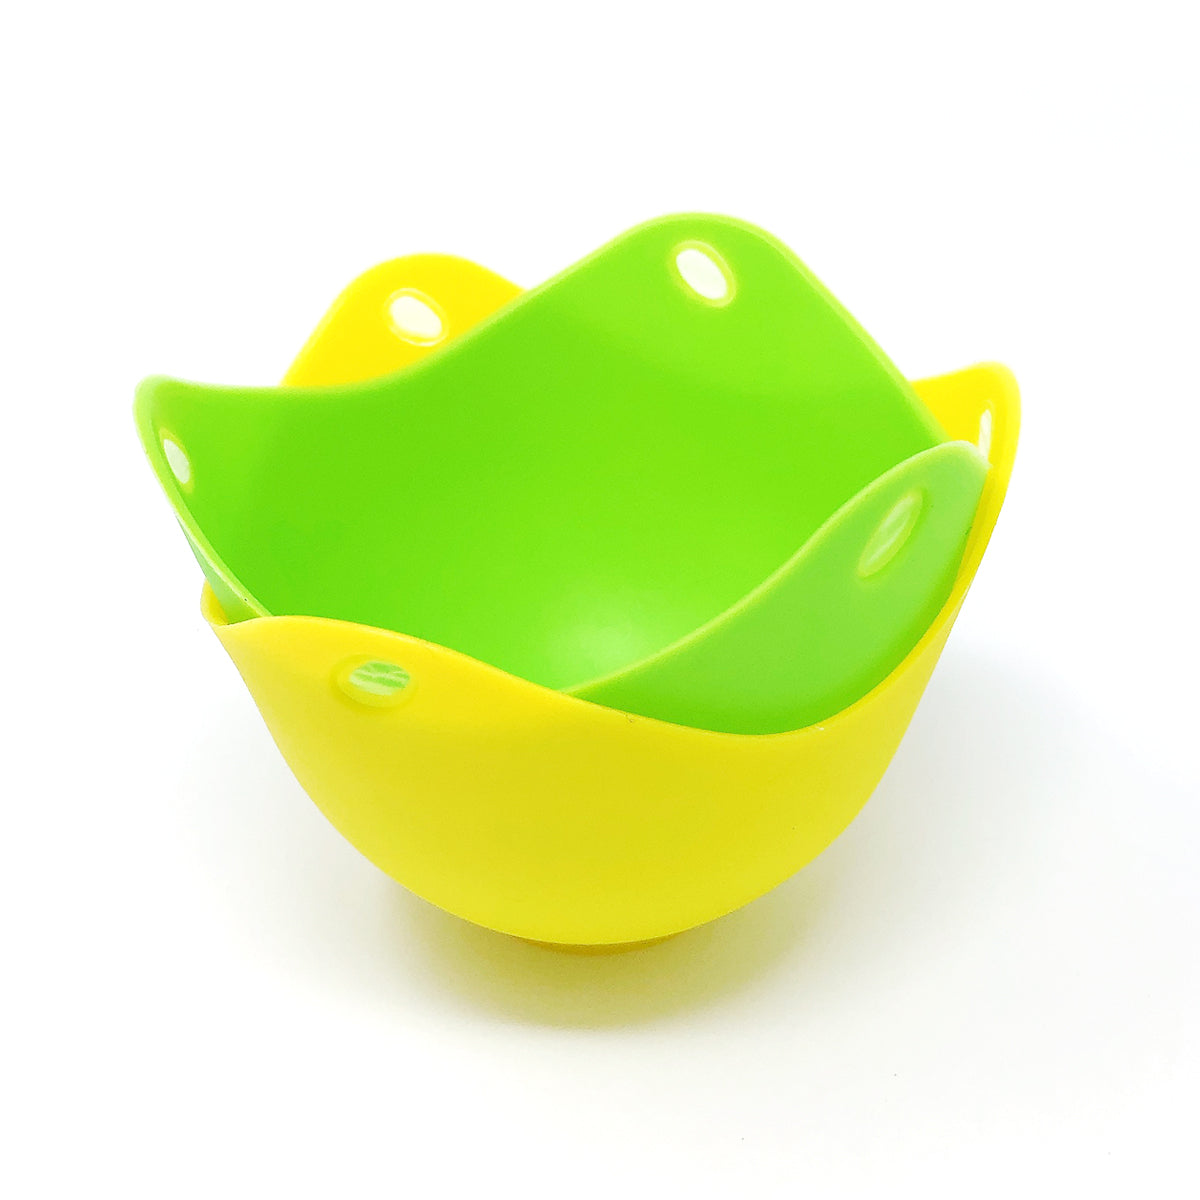 Wrapables Silicone Non-stick Egg Poachers, Poached Egg Cups for Steaming Microwaving Boiling